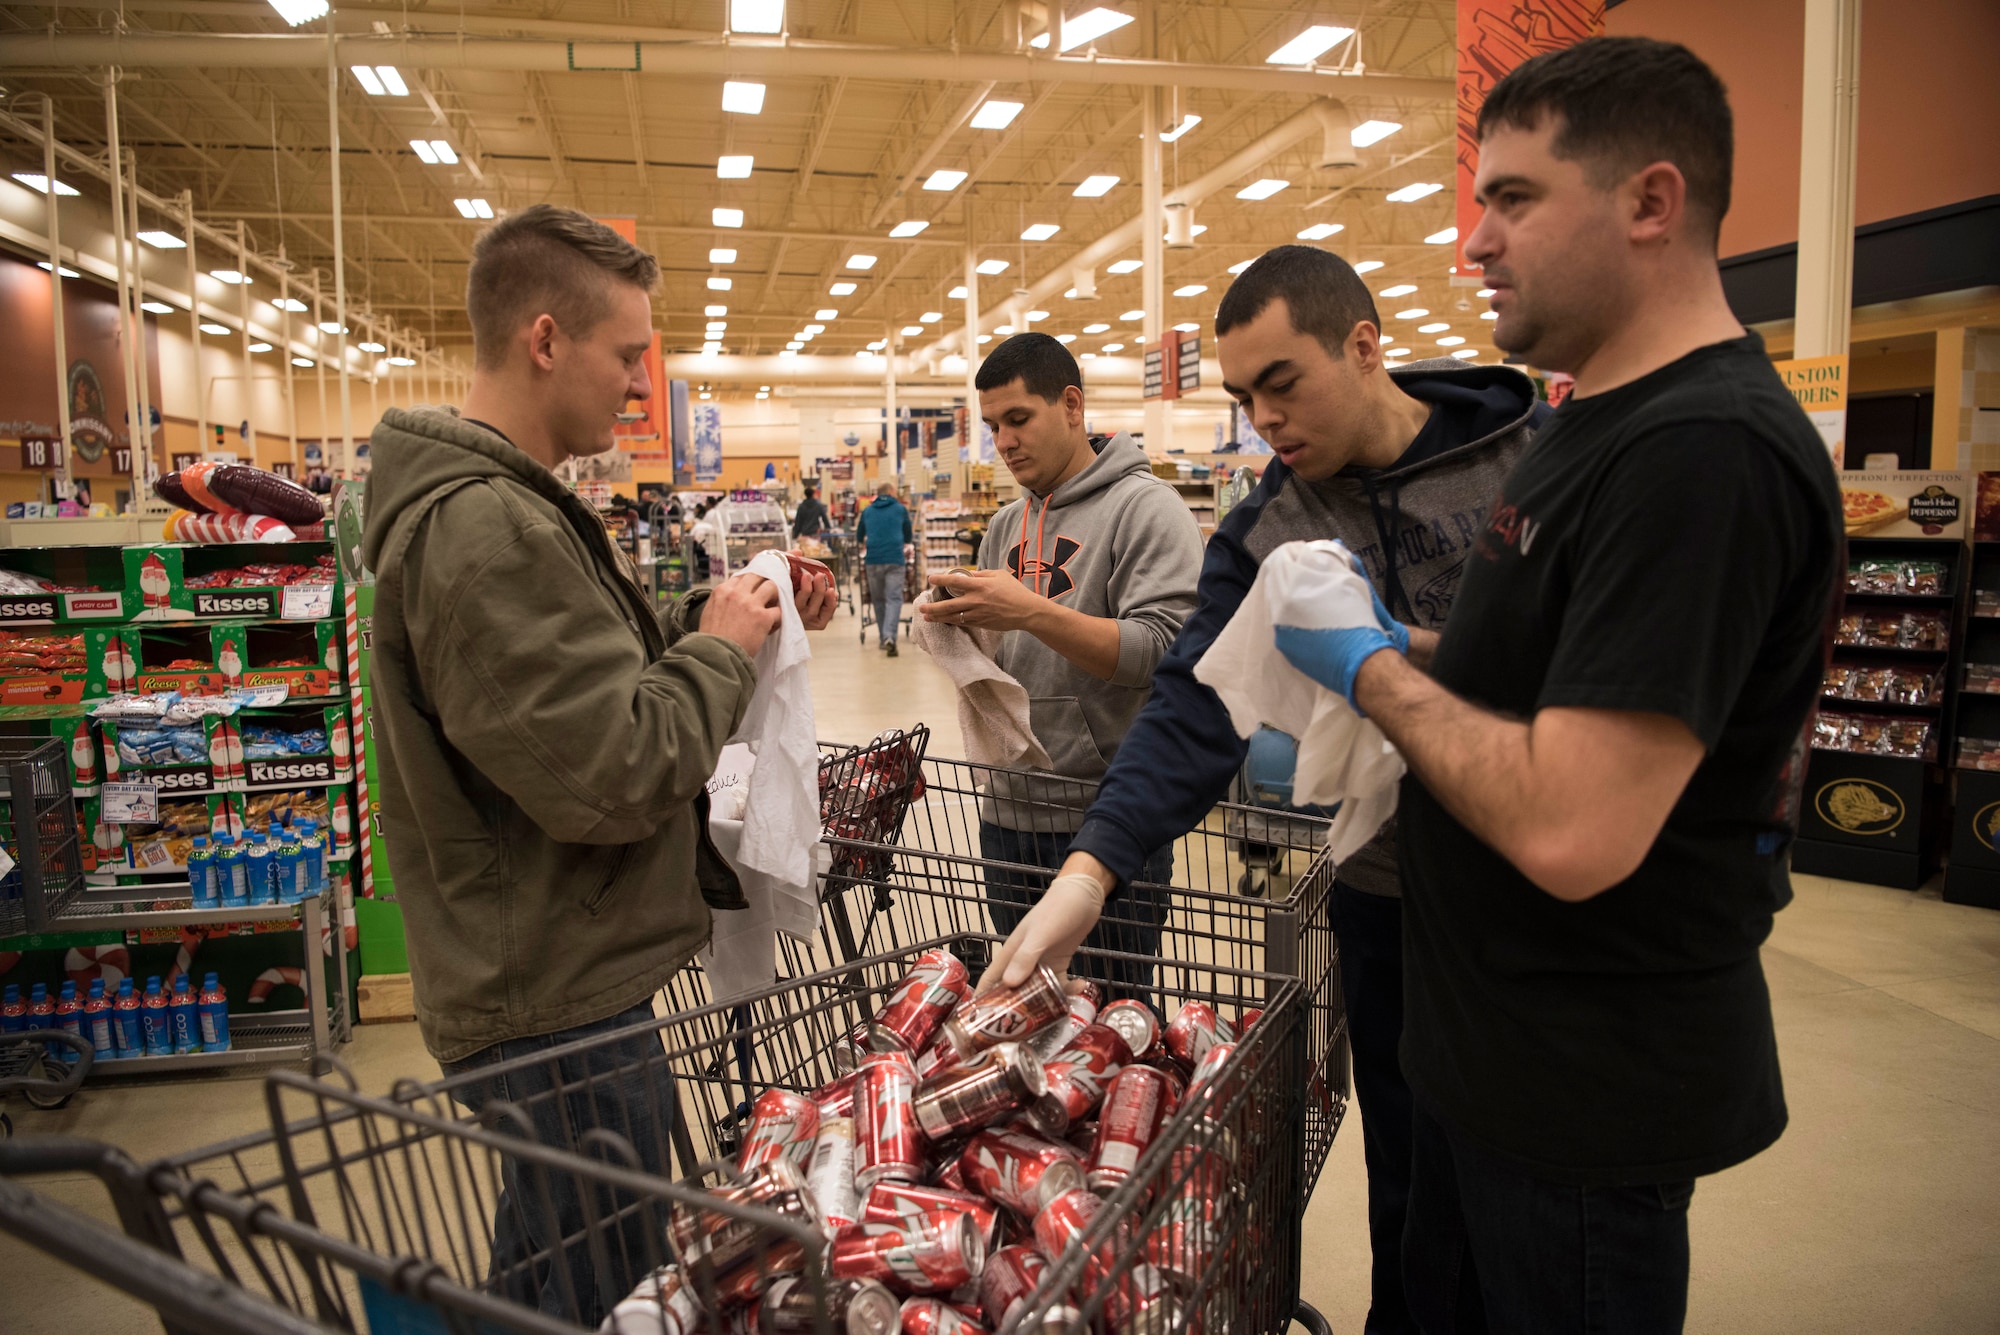 Active duty service members volunteer their time to clean up the Joint Base Elmendorf-Richardson, Alaska, Commissary Dec. 1, 2018. In less than 48 hours after the 7.0 magnitude Earthquake striking the Anchorage area at 8:29 a.m. the morning of Nov.30, 2018, JBER is mission ready and capable of resuming regular operations.